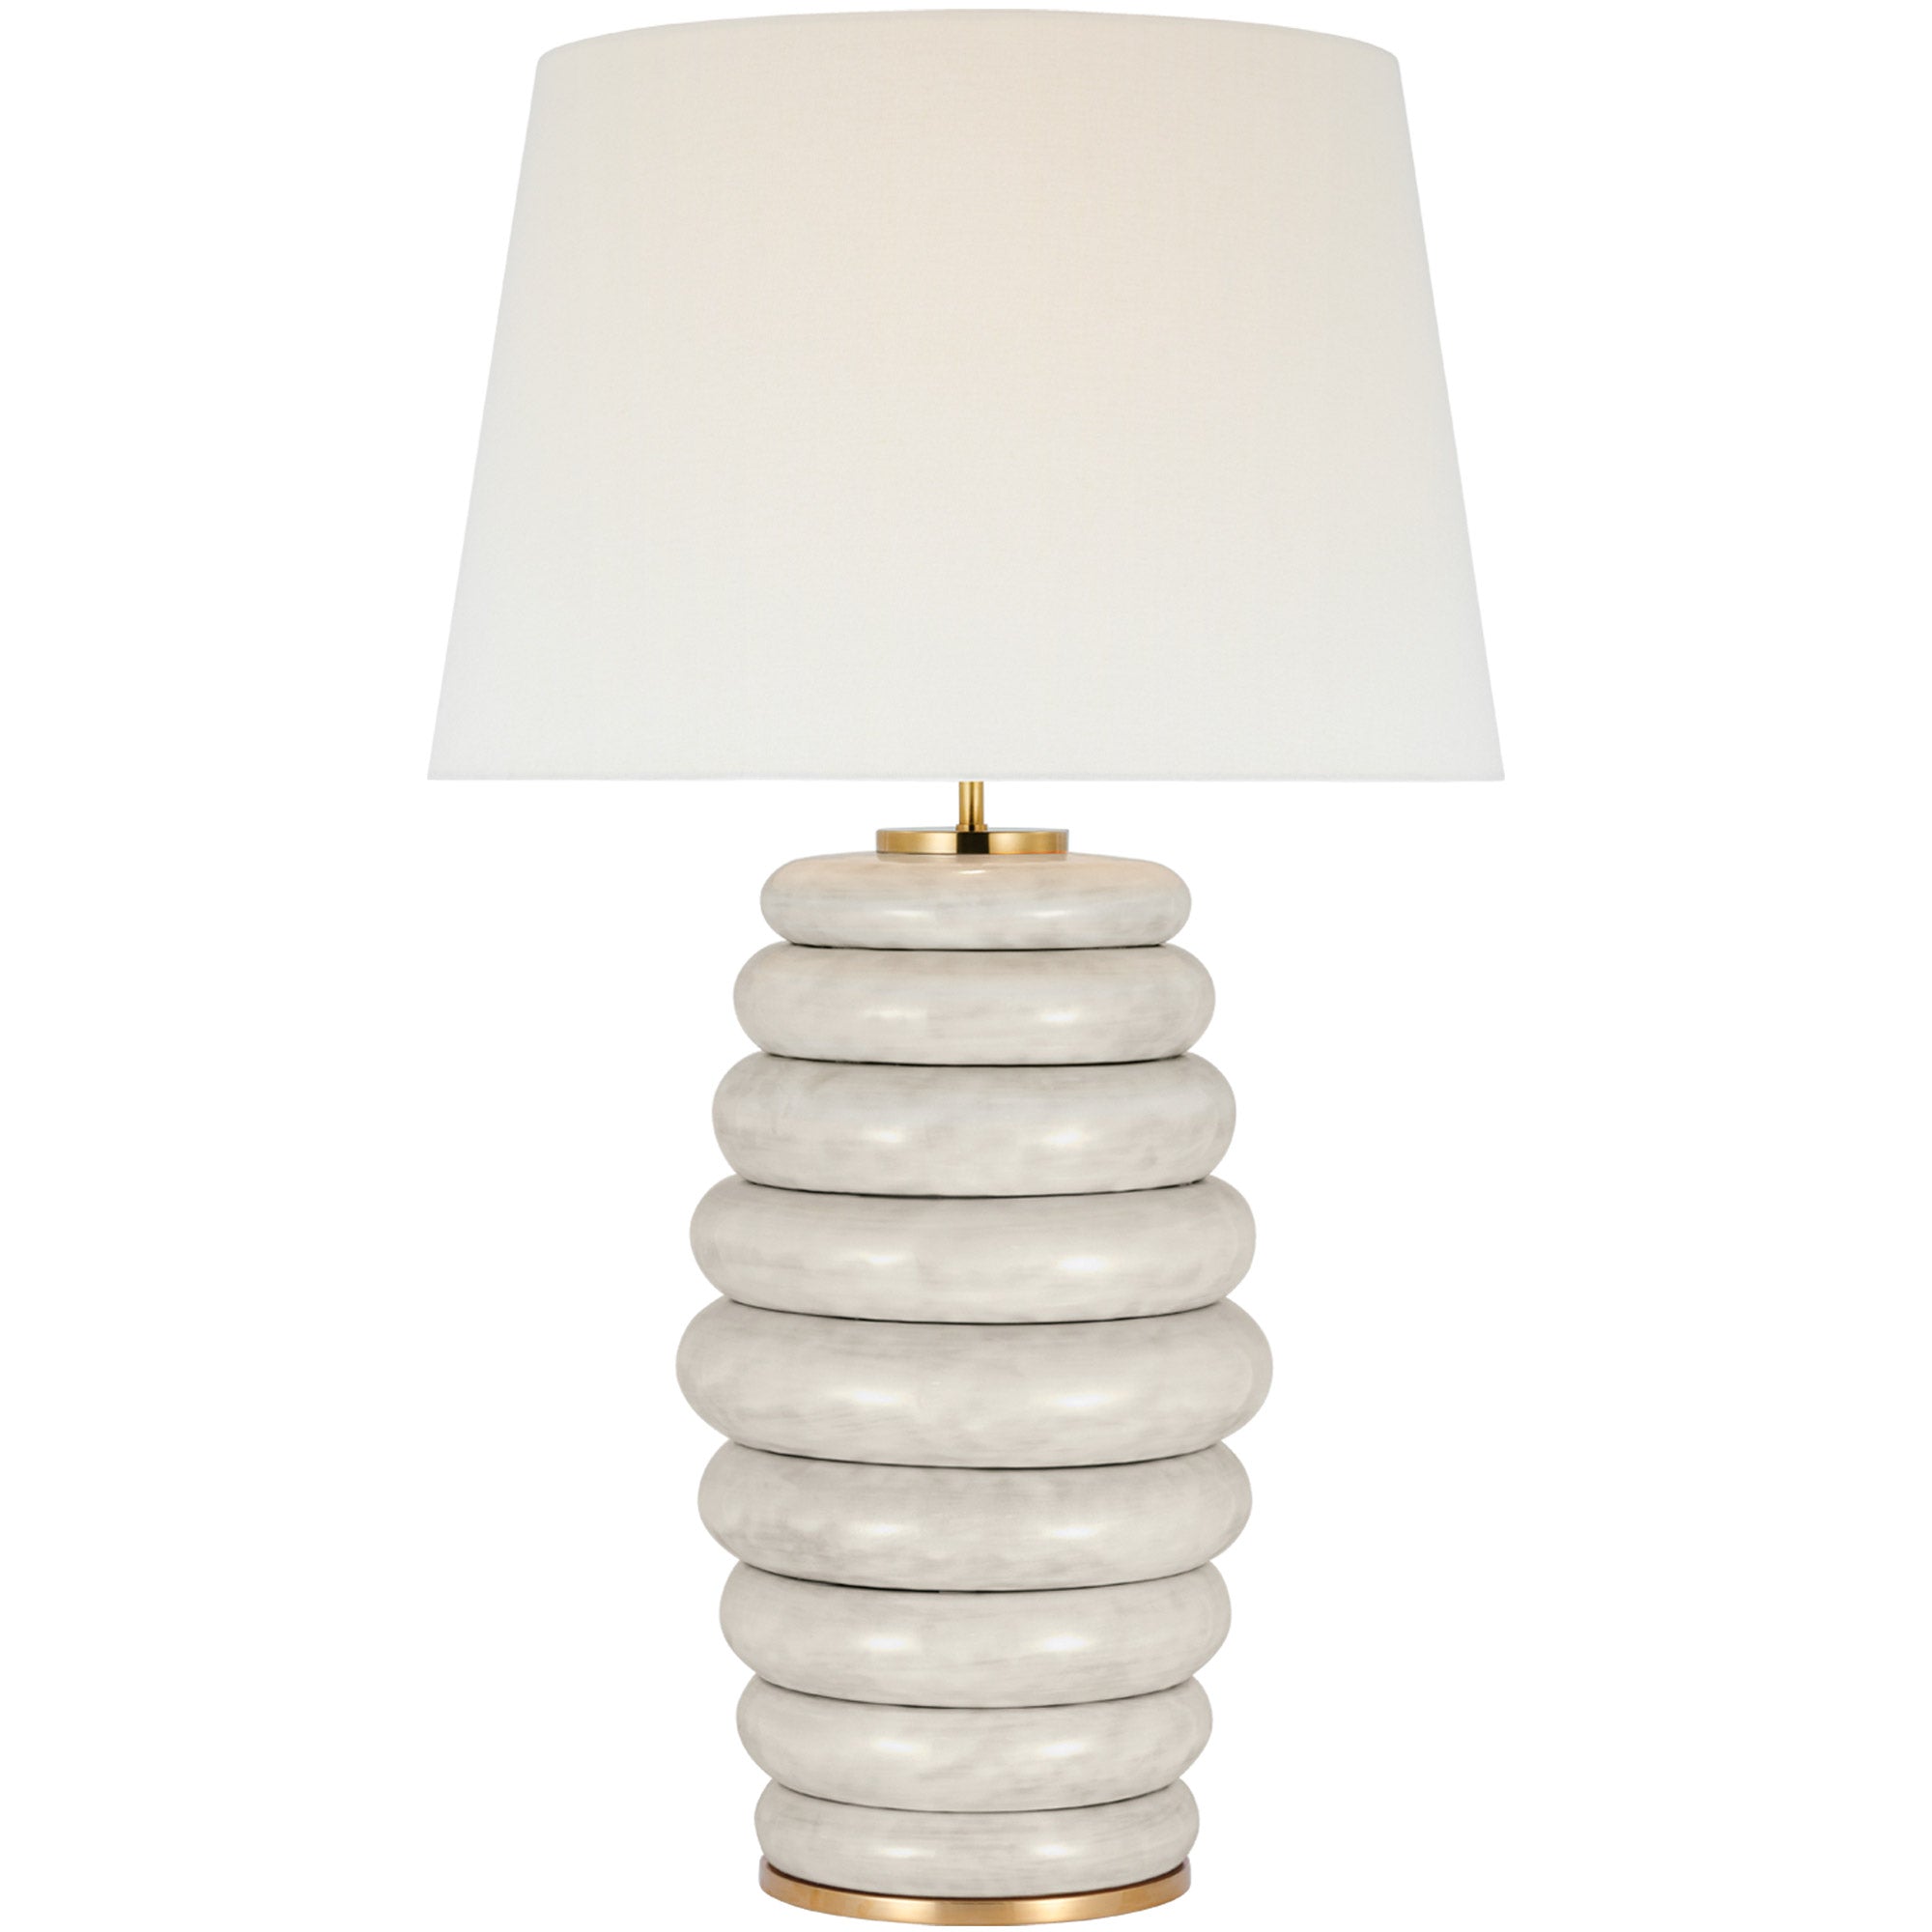 Visual Comfort Kelly Wearstler Extra Large Phoebe Stacked Table Lamp